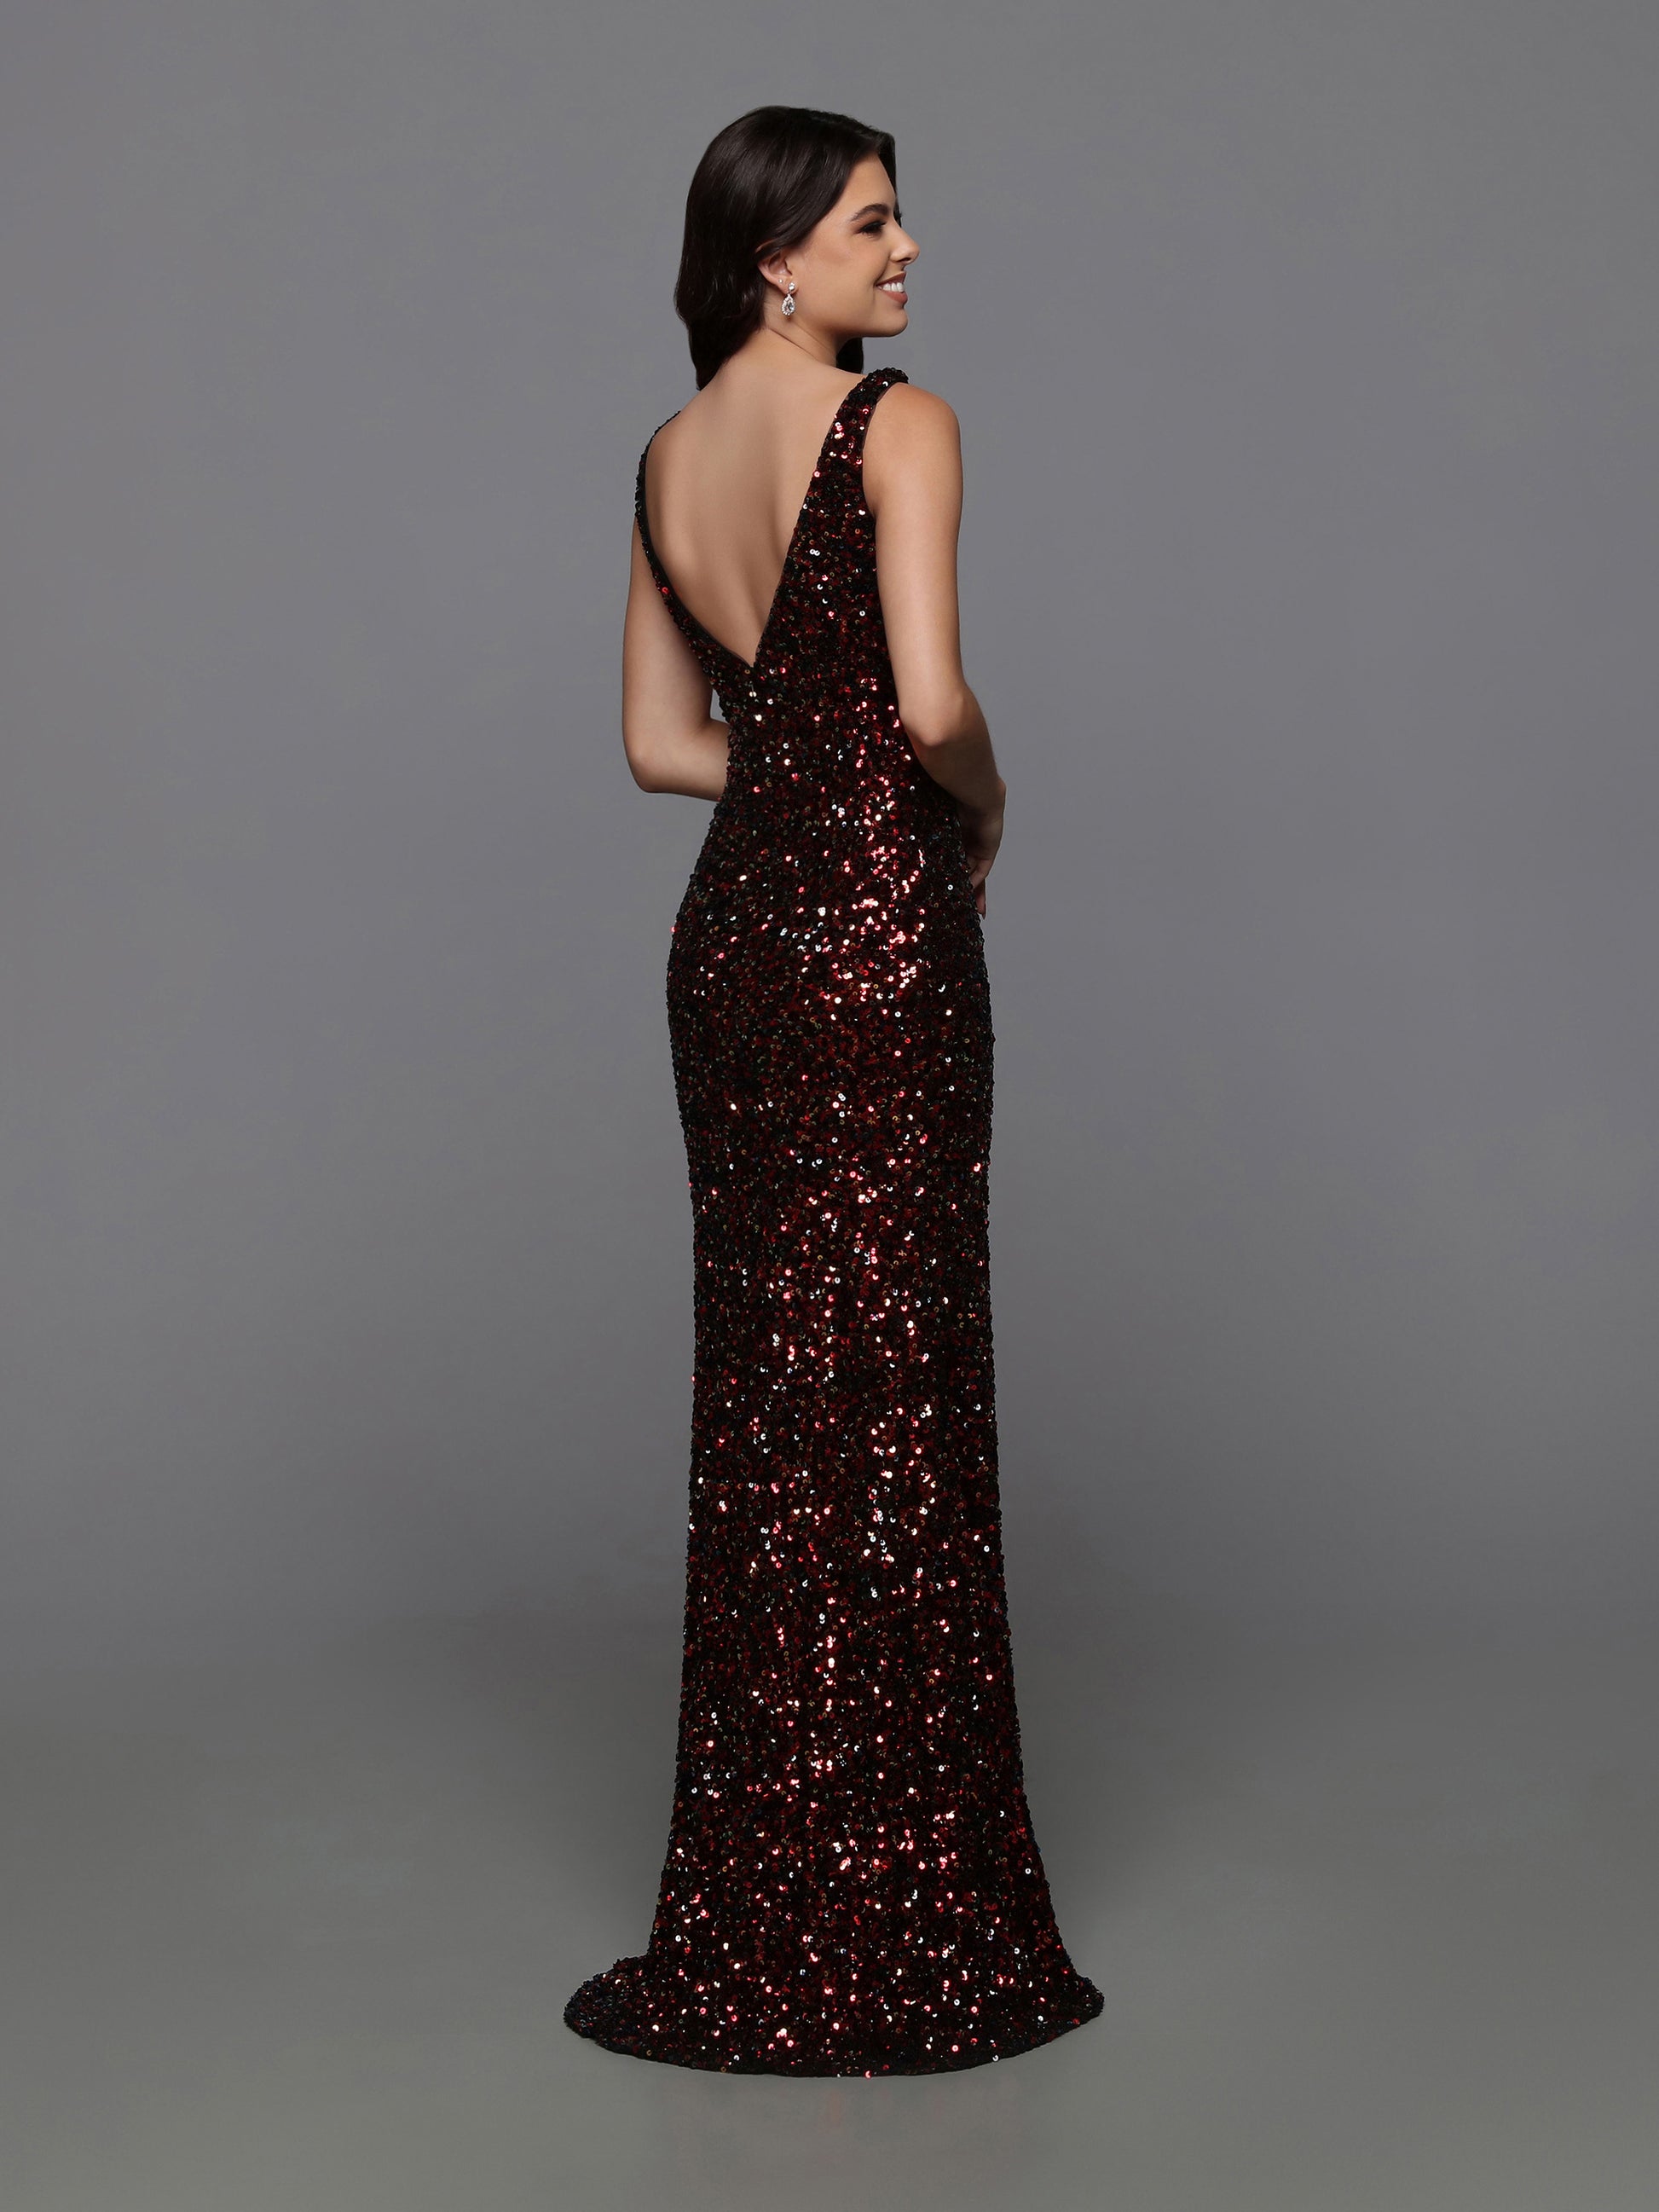 Sparkle Prom 72227 Long Fitted Sequin Prom Dress Scoop Neck Slit Formal Gown  Sizes: 0-20  Colors: Multi/Black